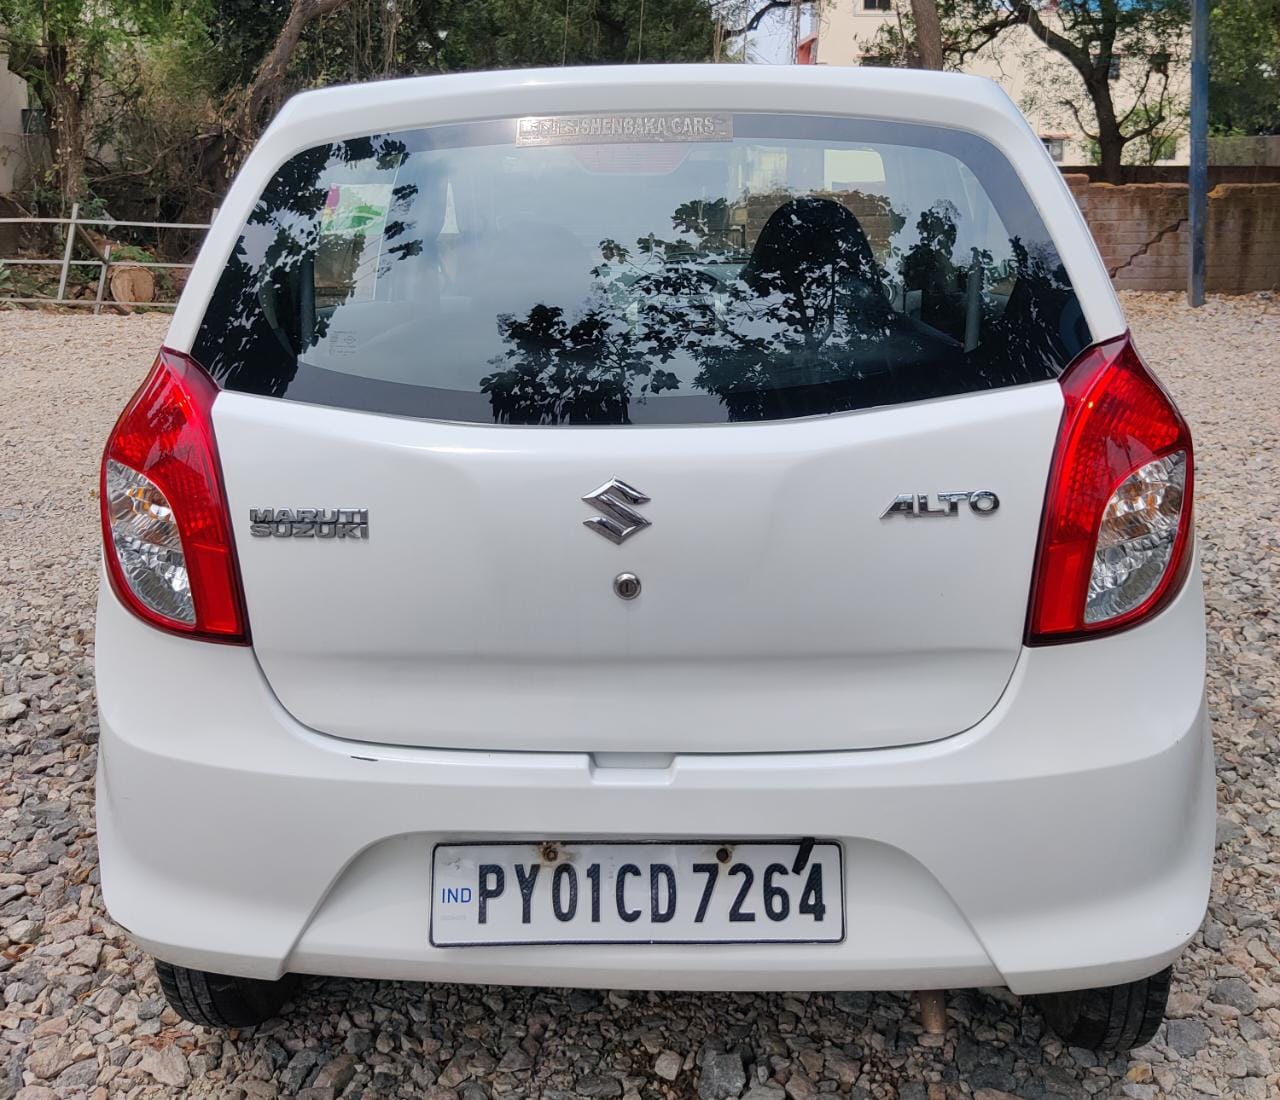 6513-for-sale-Maruthi-Suzuki-Alto-800-Petrol-First-Owner-2014-PY-registered-rs-259999